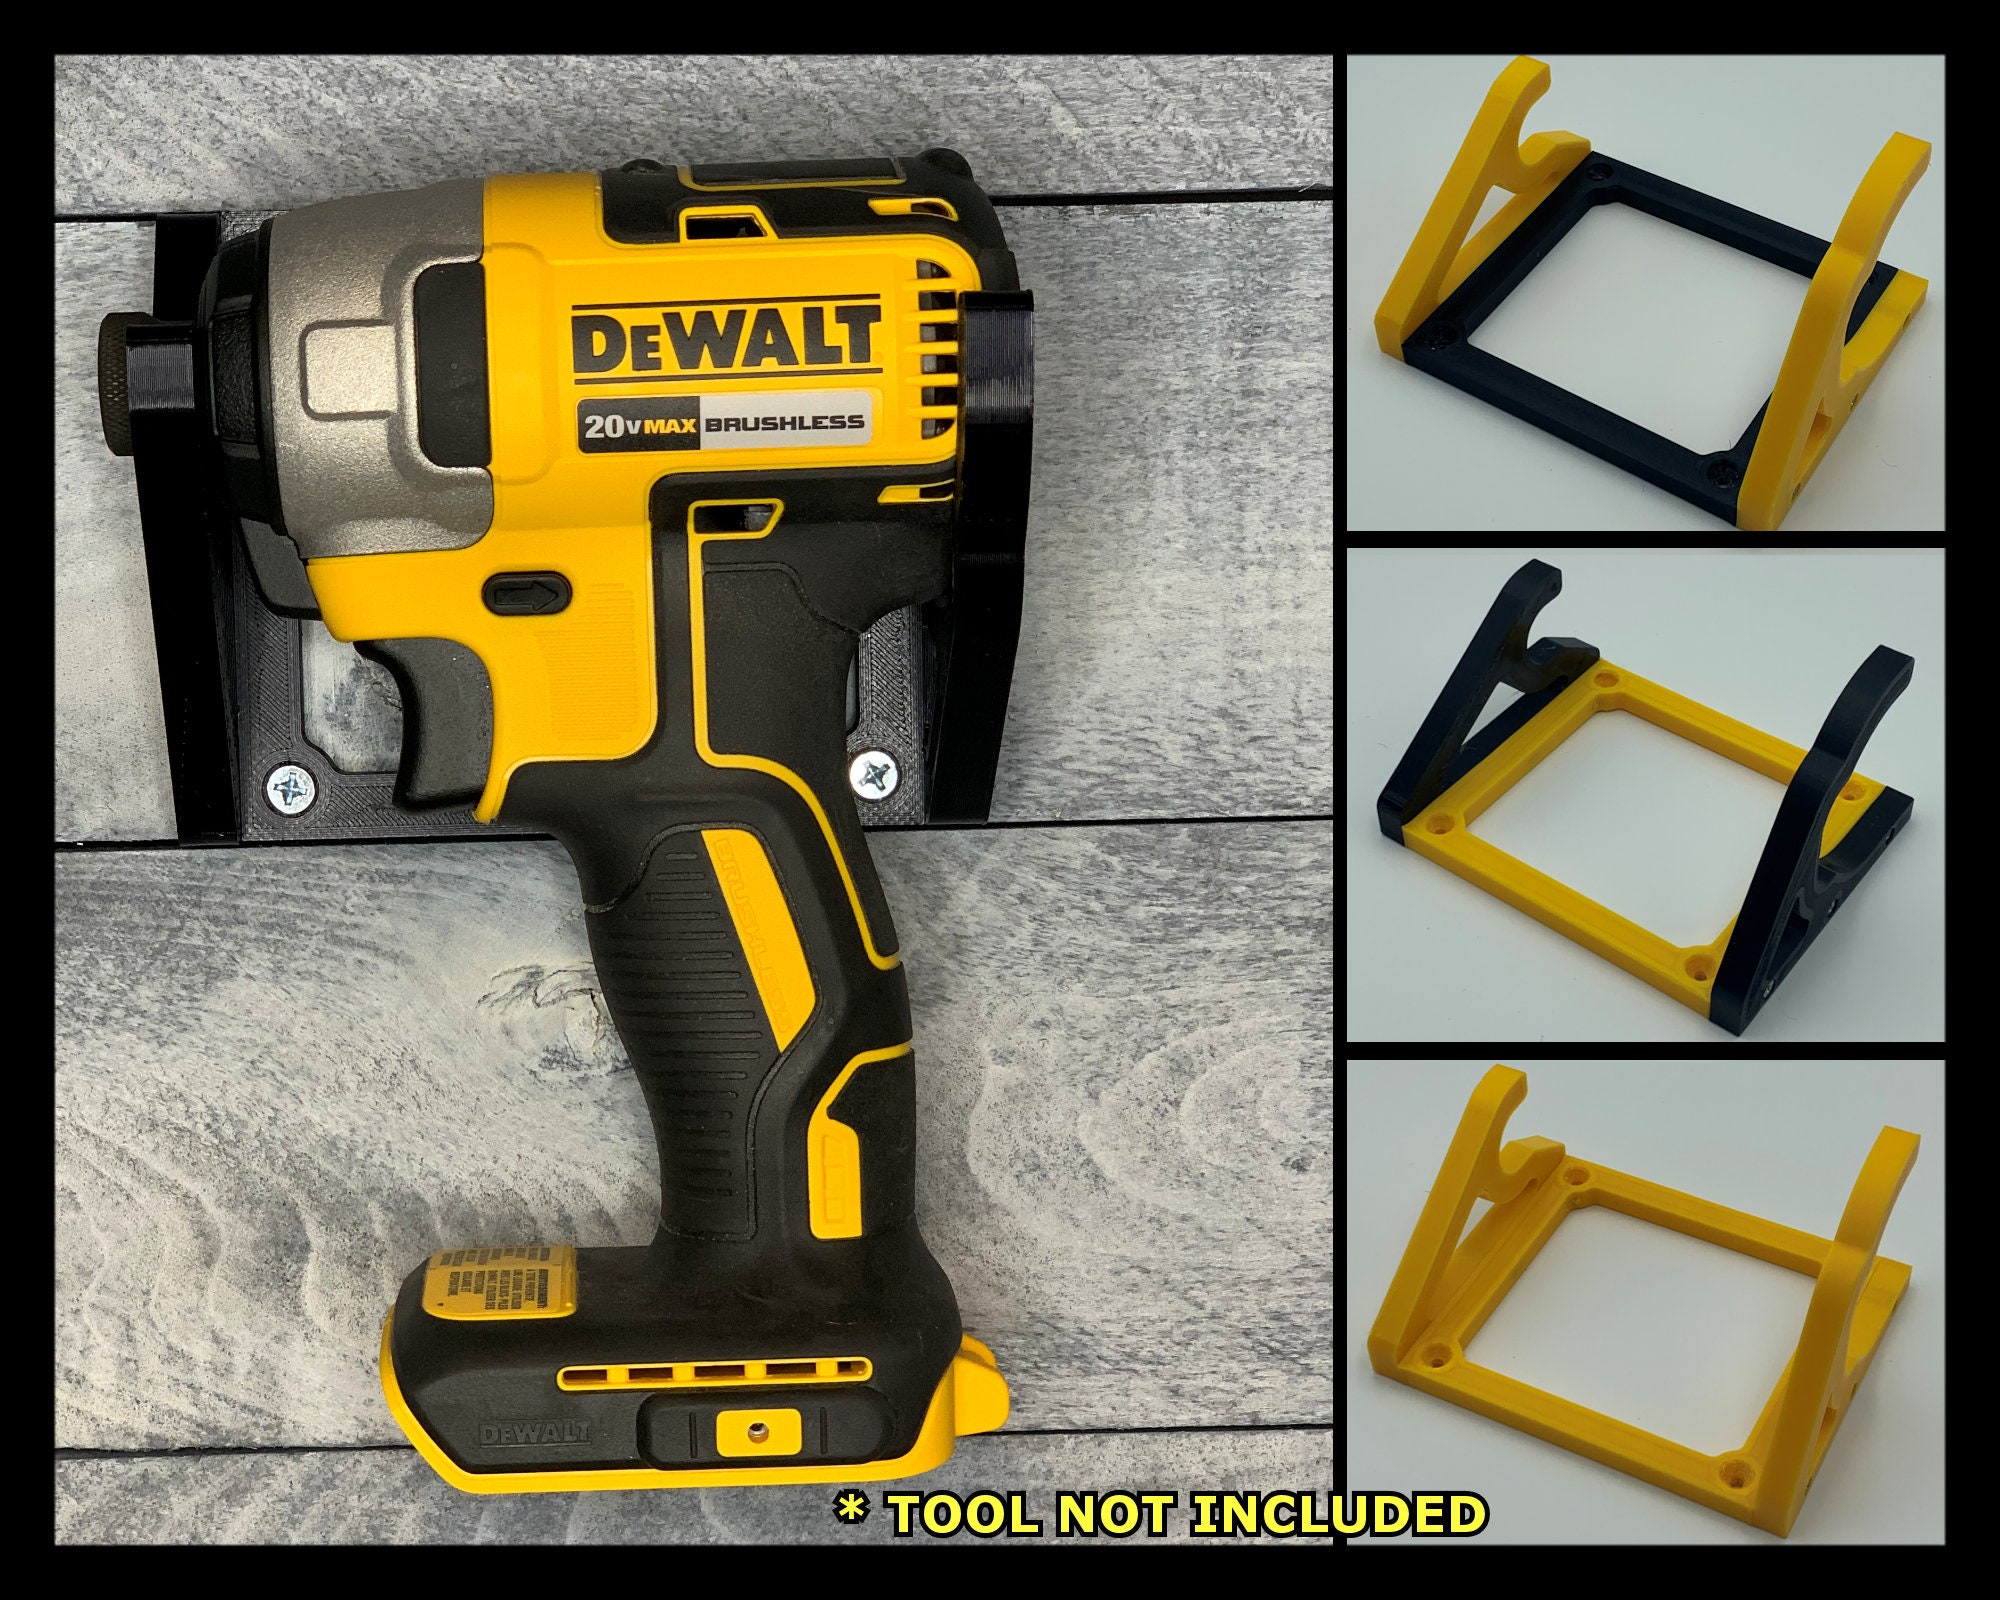 DEWALT DCF787 Wall Mount Made in USA tool NOT Included - Etsy